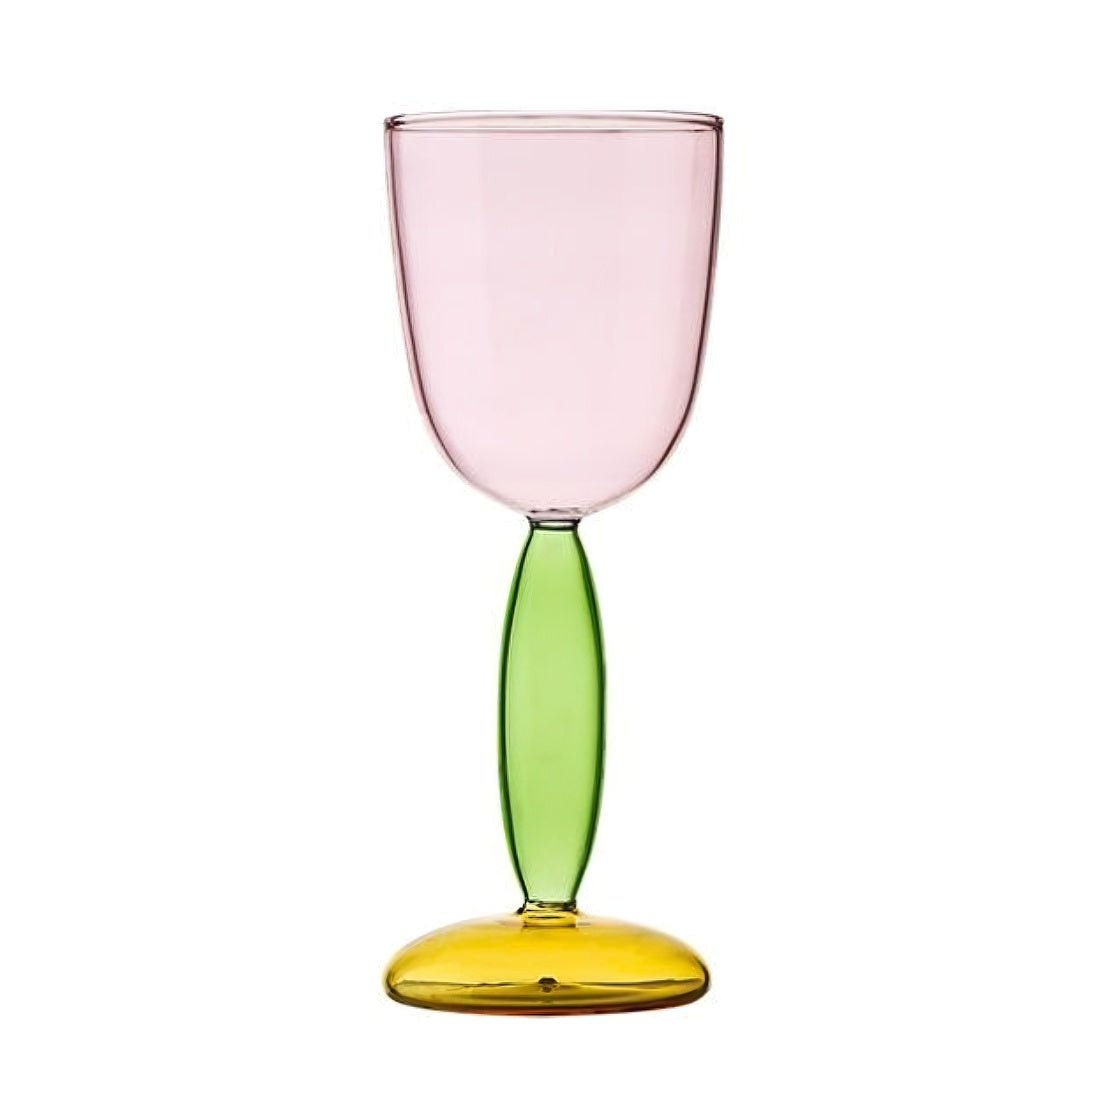 Pink glass goblet with green stem and yellow bottom.